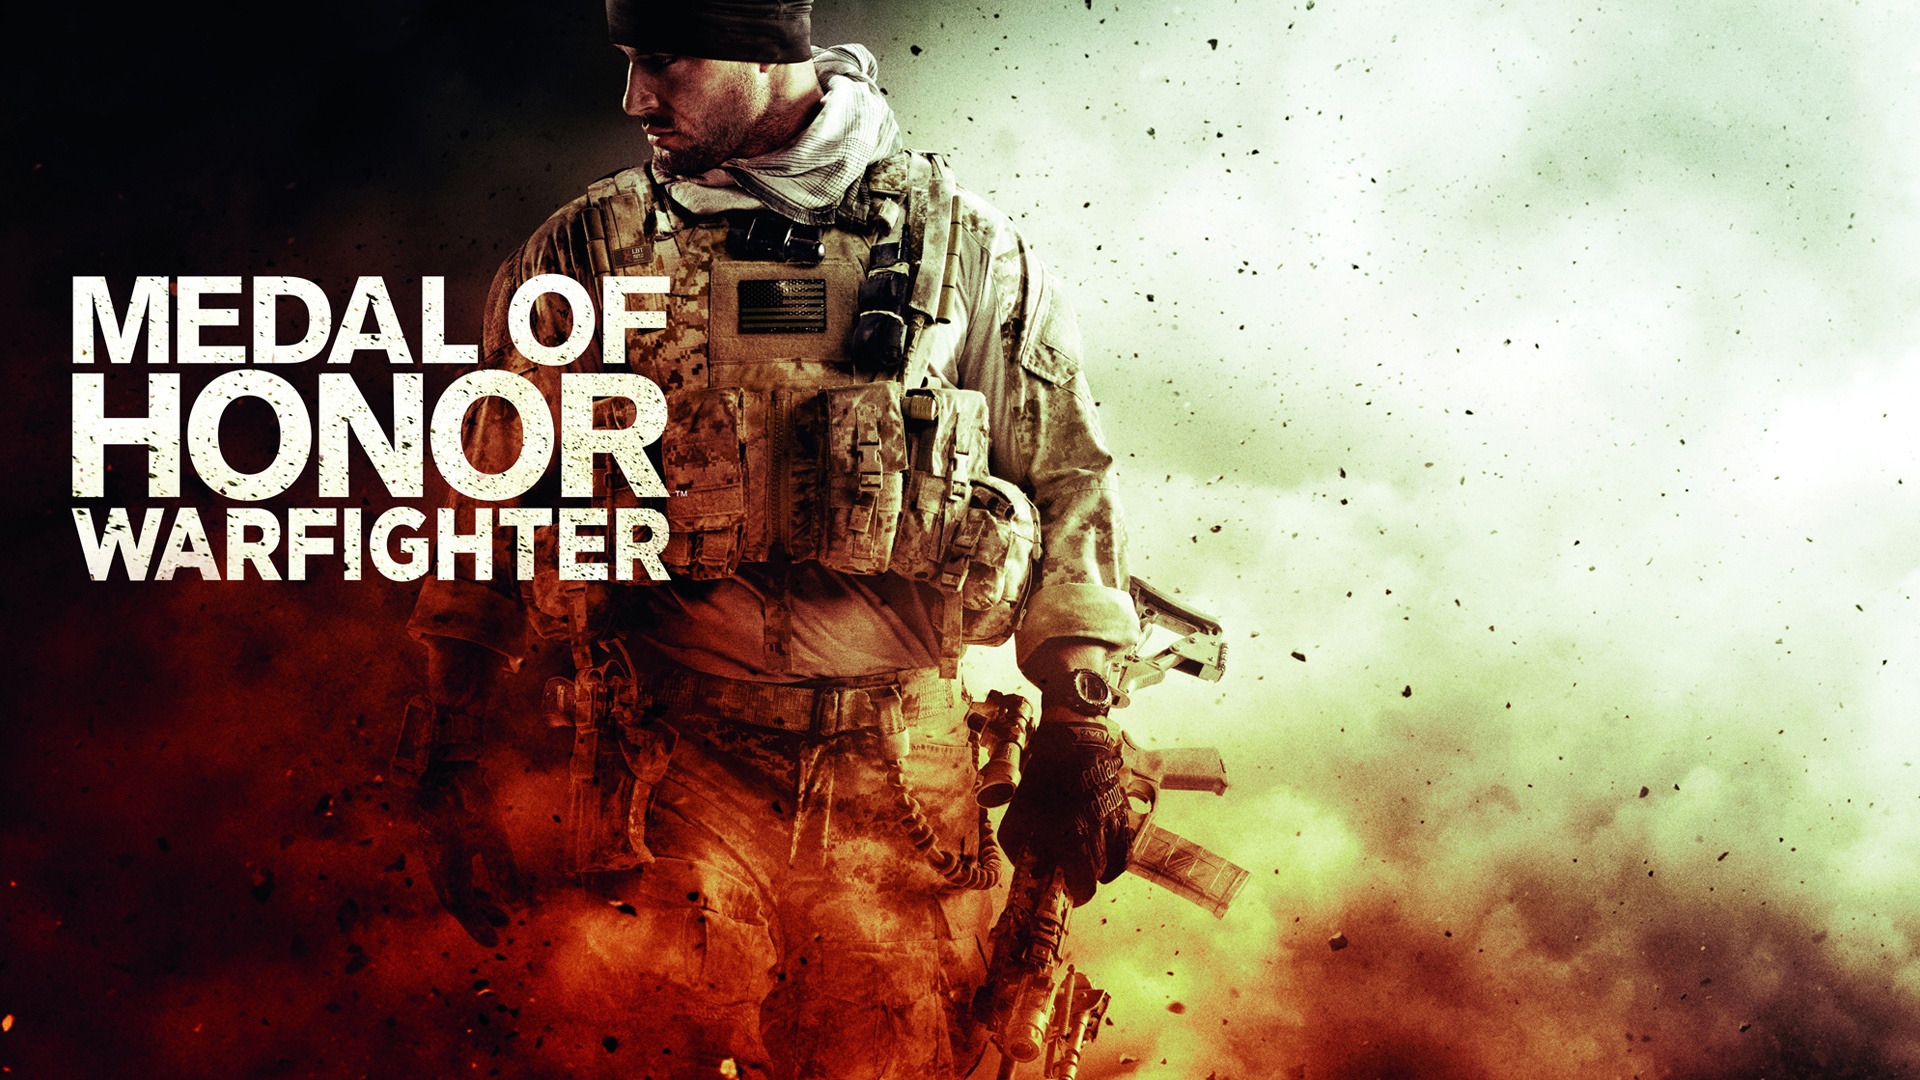 Medal of Honor Warfighter for 1920 x 1080 HDTV 1080p resolution